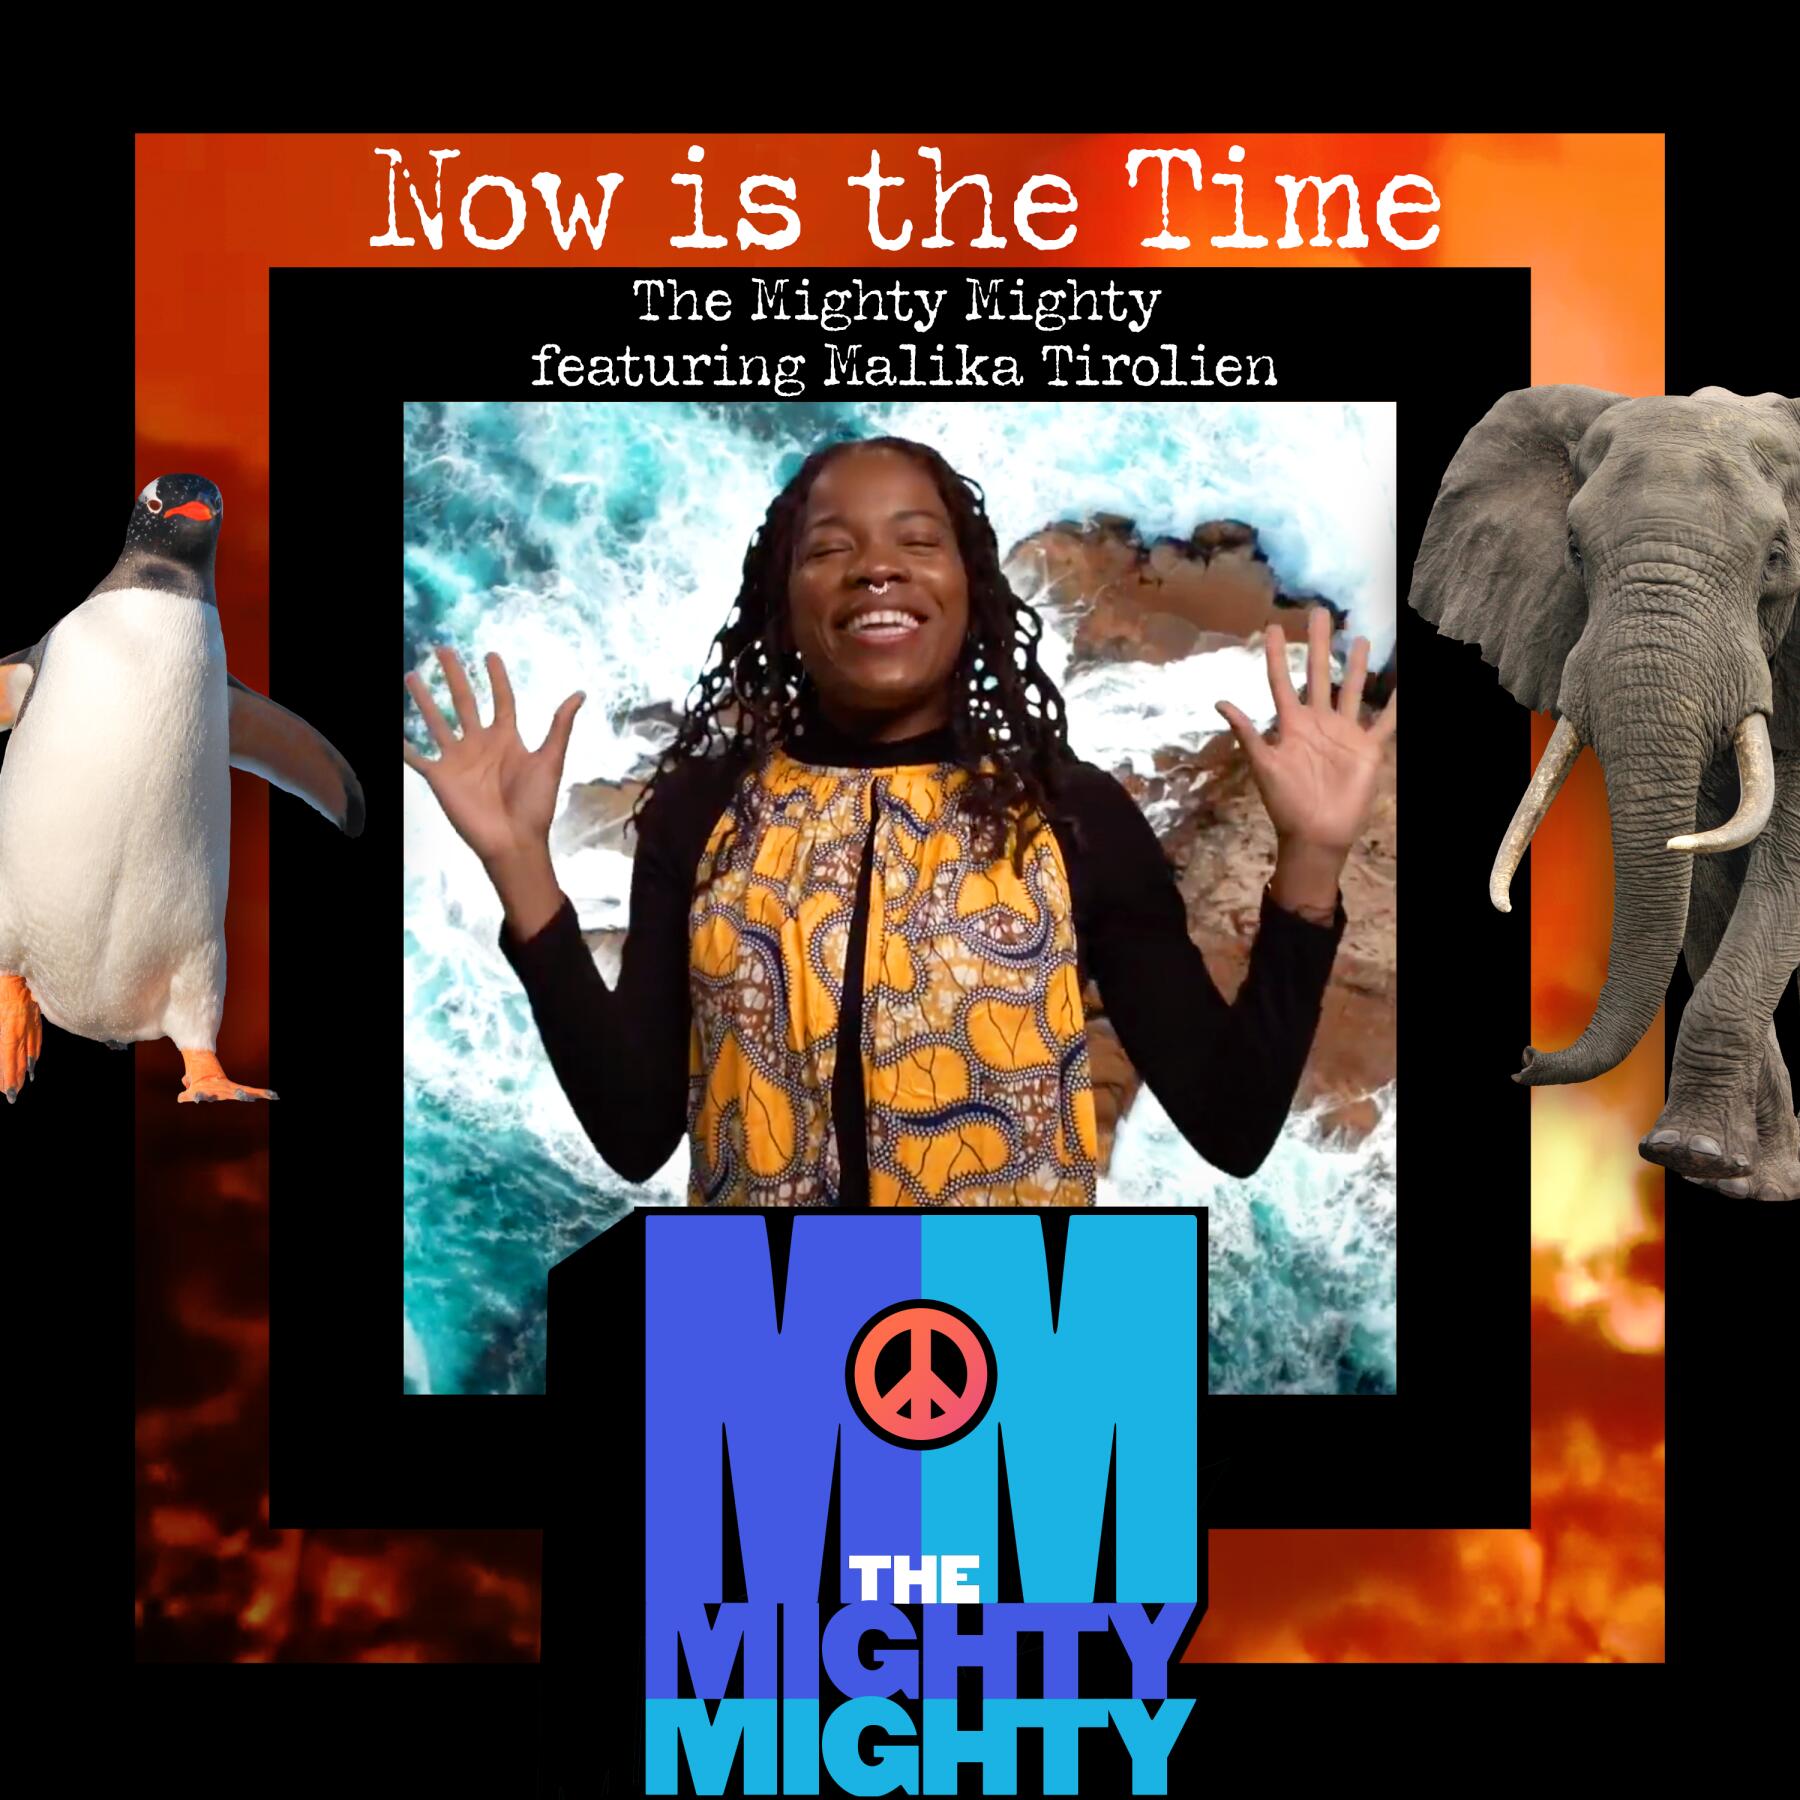 The Mighty Mighty "Now is the Time" single released